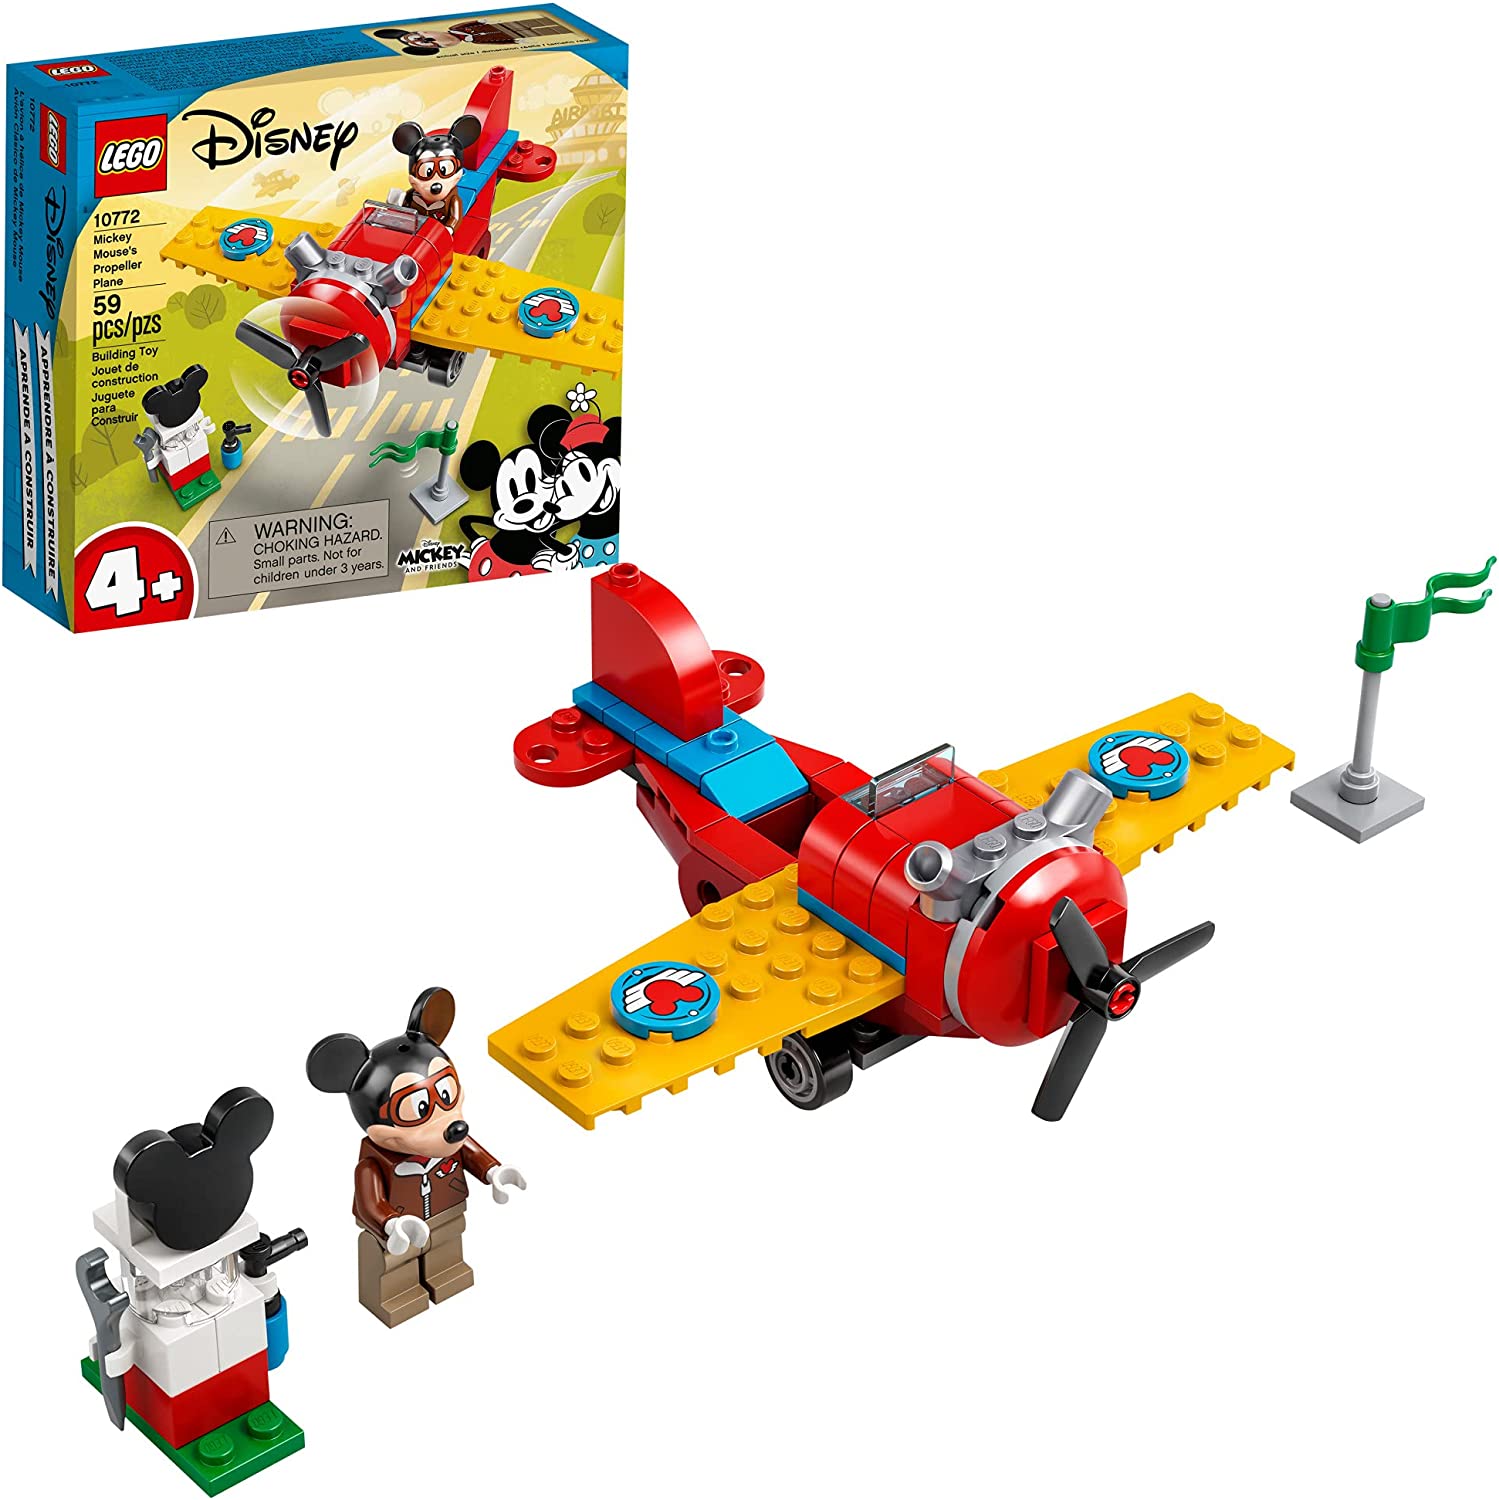 59-Pc LEGO Disney Mickey & Friends Mickey Mouse's Propeller Plane Building Playset $7 + FS w/ Amazon Prime or FS on $25+